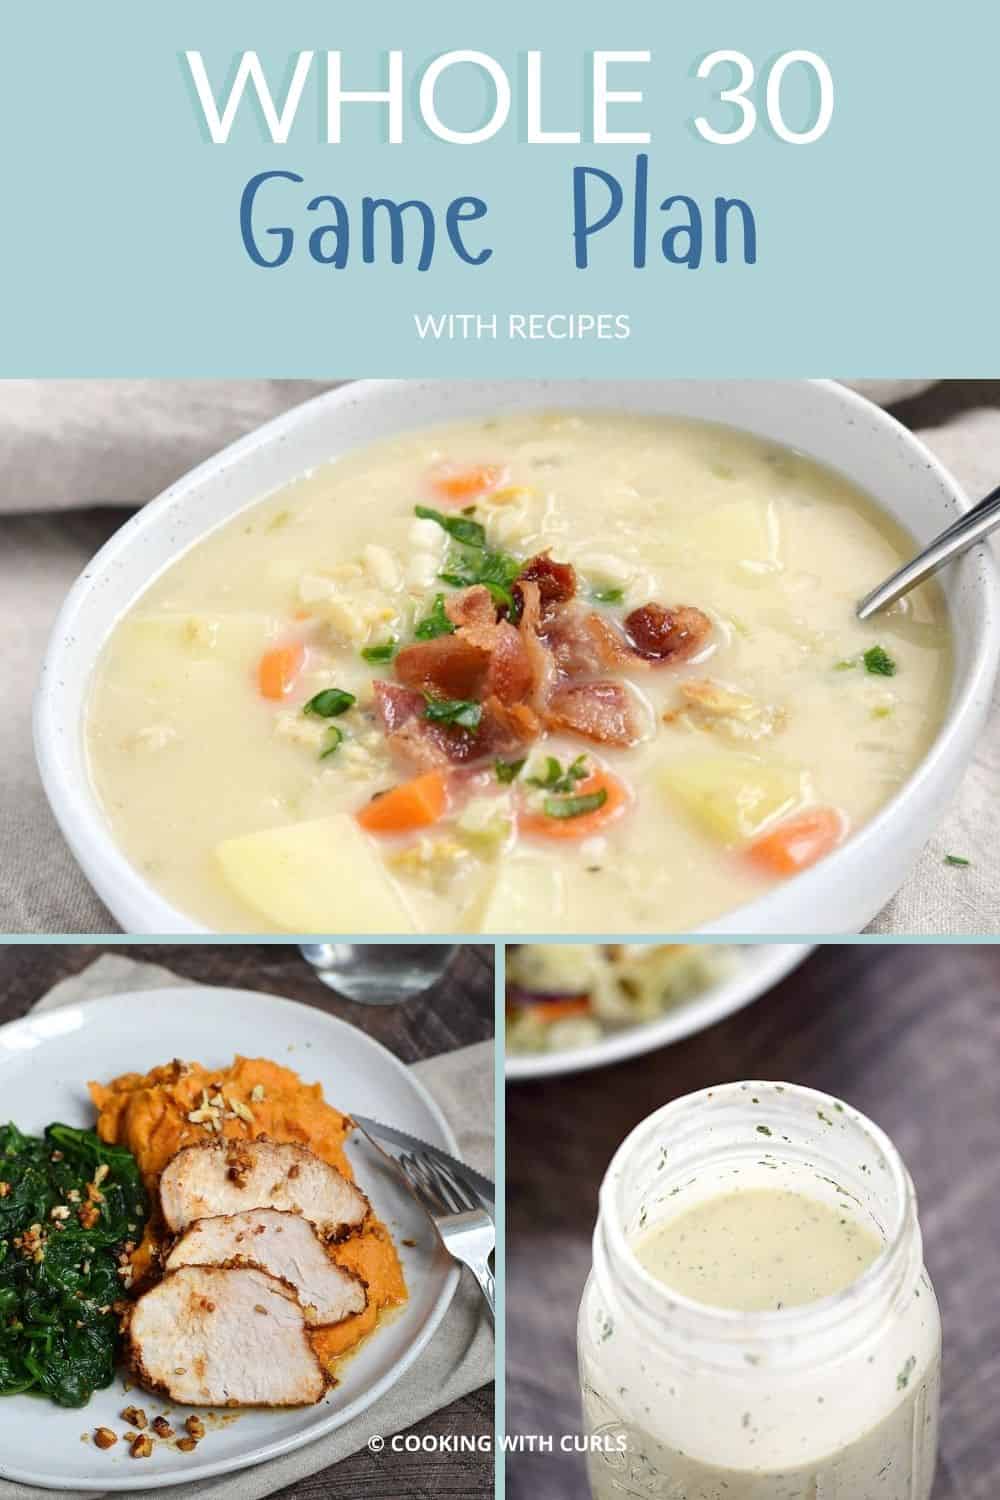 A collage image with clam chowder, pork with sweet potatoes, and ranch dressing with graphic title across the top.